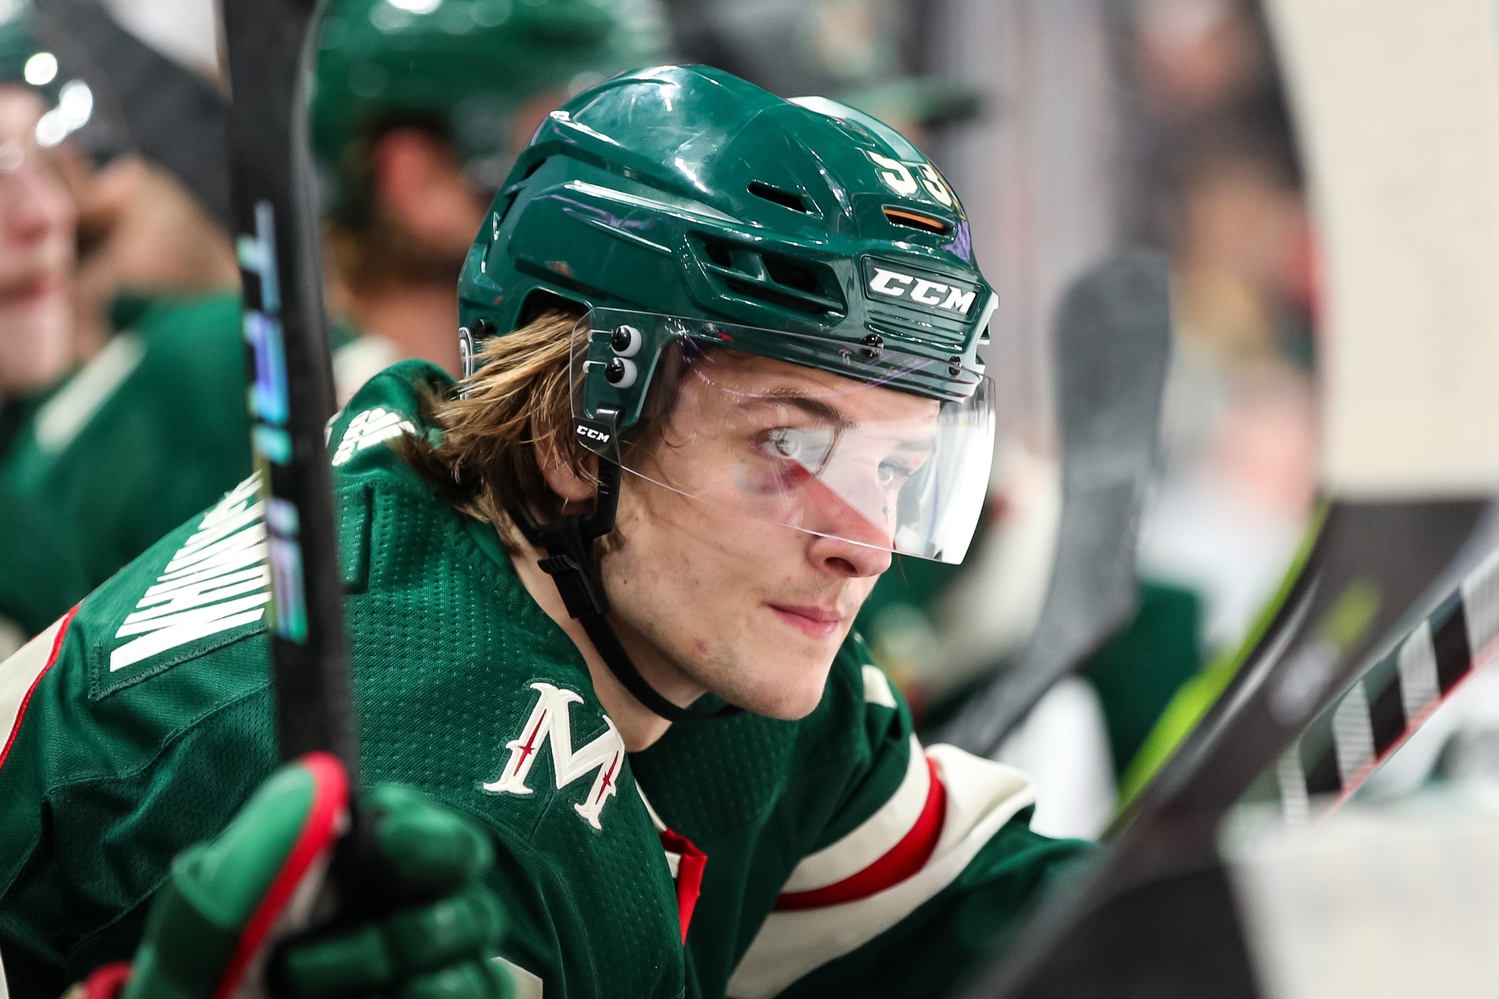 Kaprizov scores twice, fills the highlight reel in Wild's win over  Lightning - Sports Illustrated Minnesota Sports, News, Analysis, and More